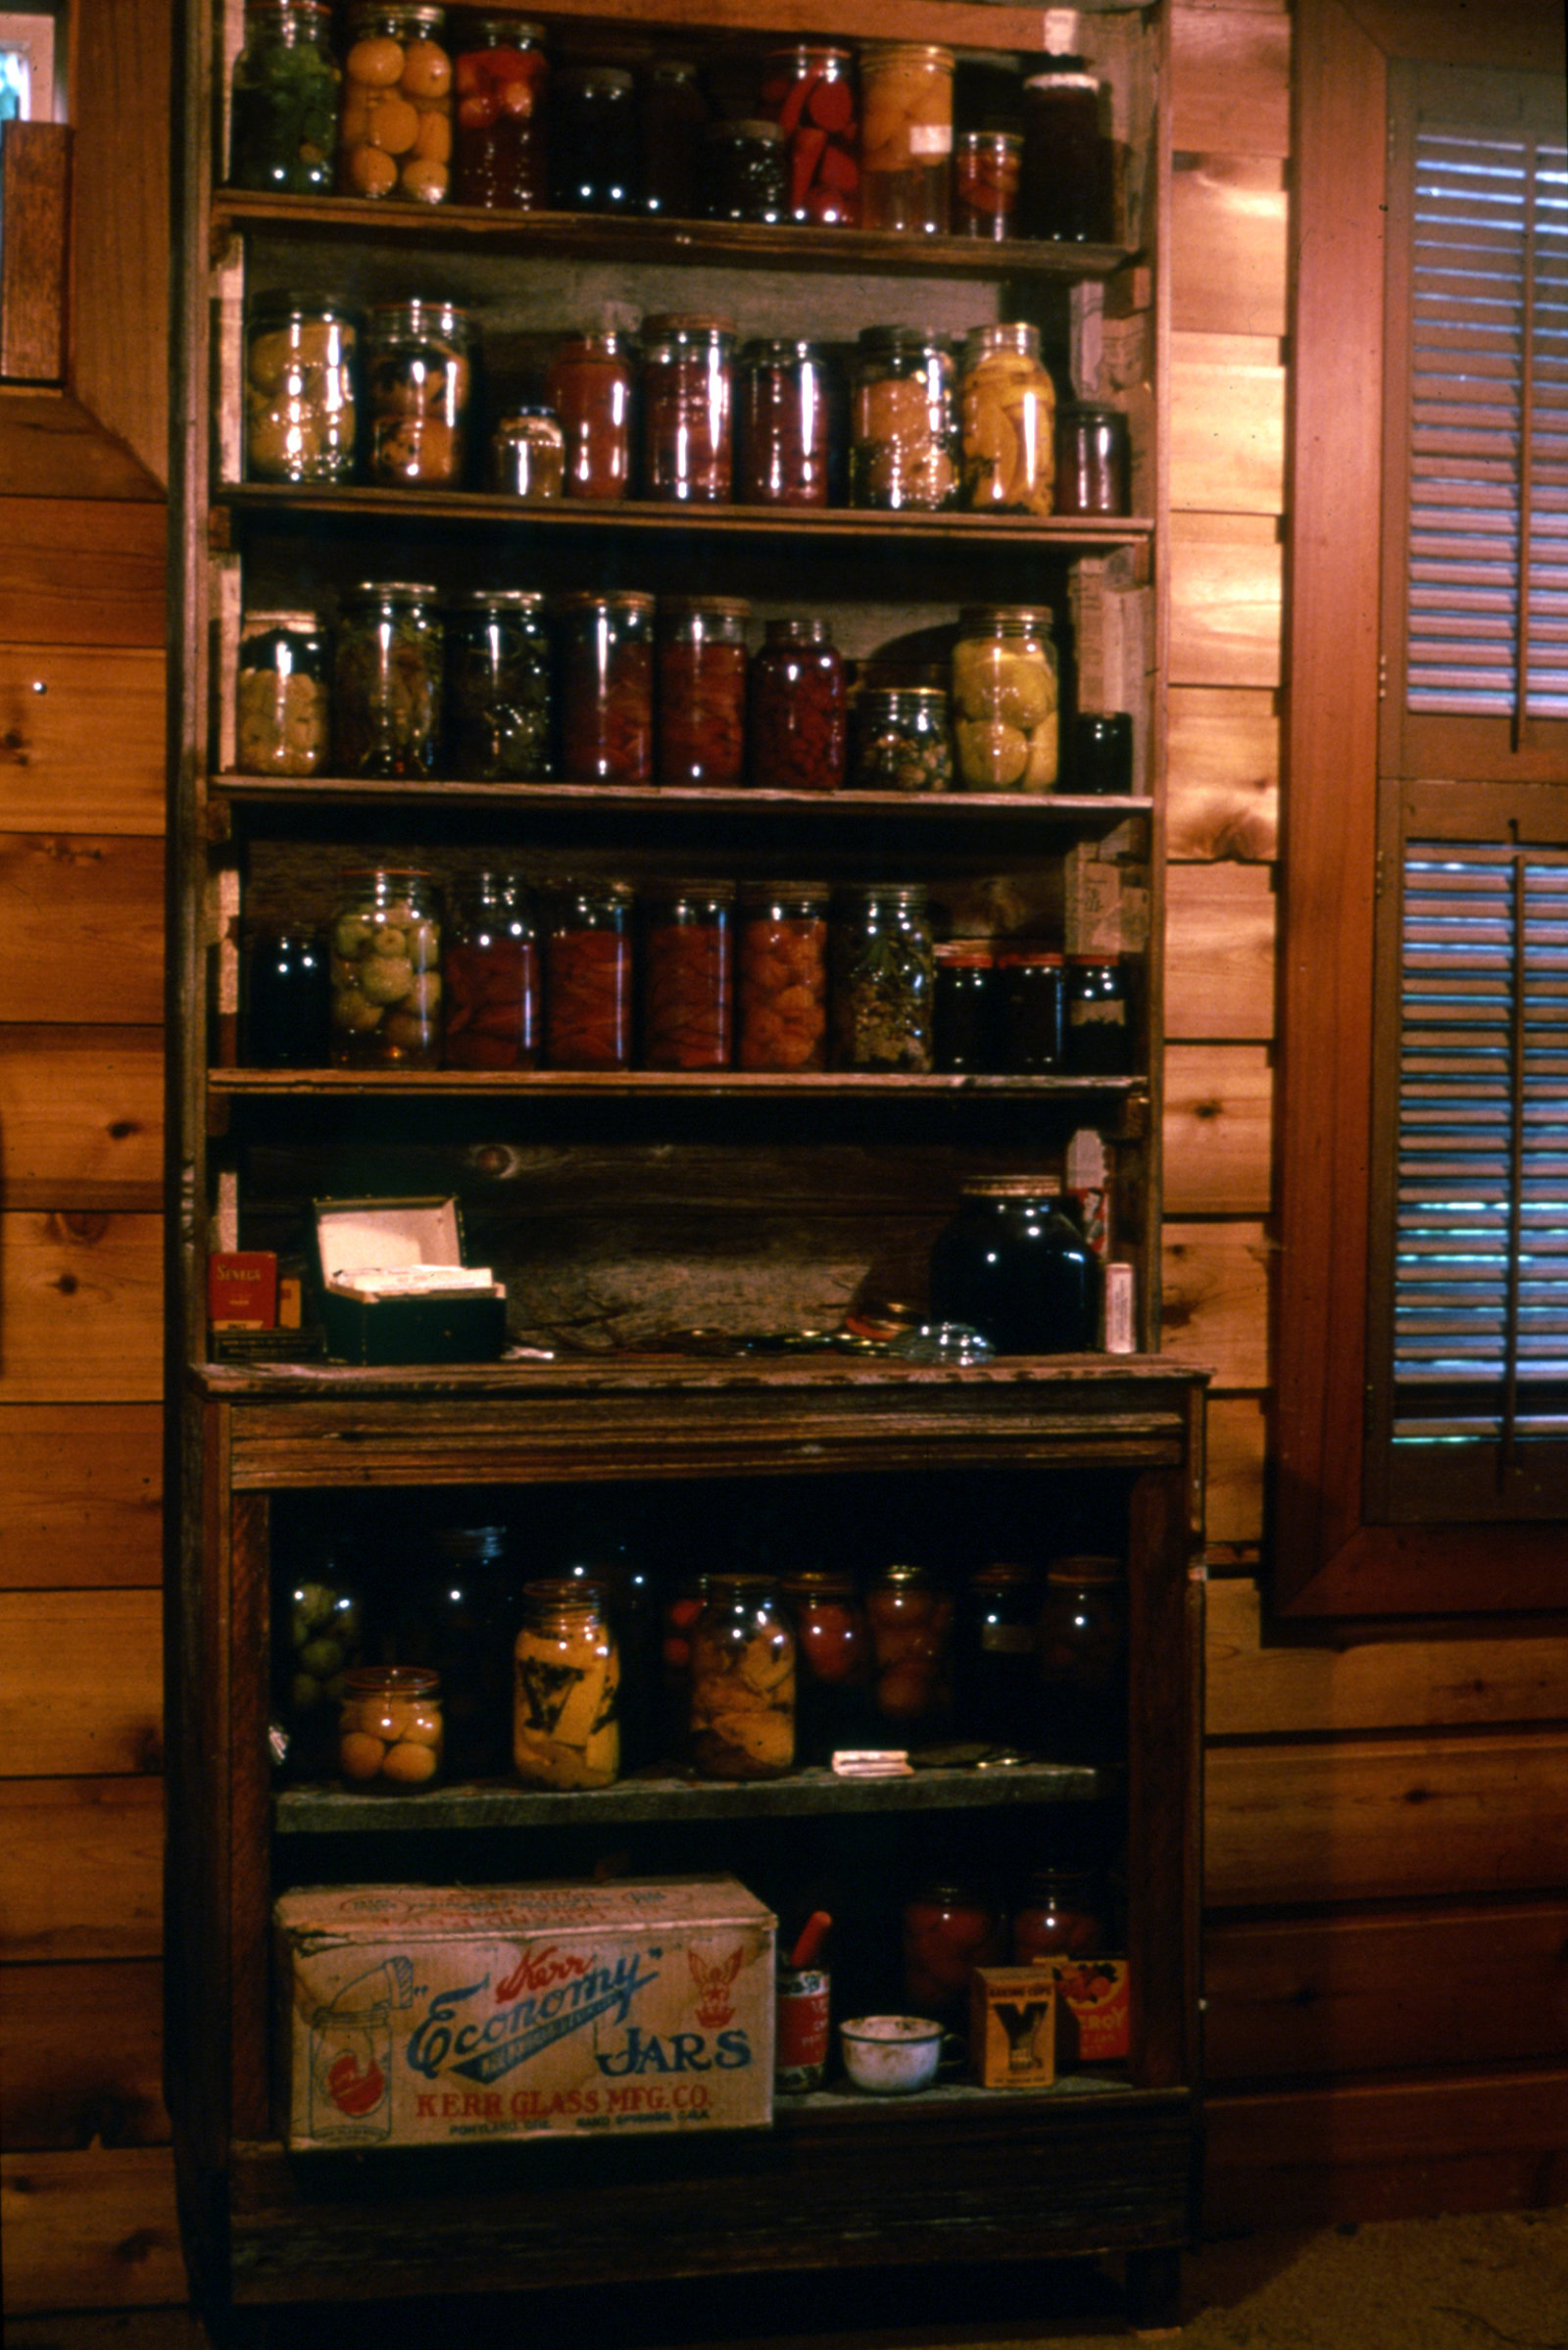 Liz Magor, Time and Mrs. Tiber, 1976, wooden shelf with jars of preserves, recipe box, forks, glass tops, rubber sealers, metal lids, cardboard boxes, enamel cup, tin can, 84 x 36 x 13 in. (214 x 91 x 32 cm)